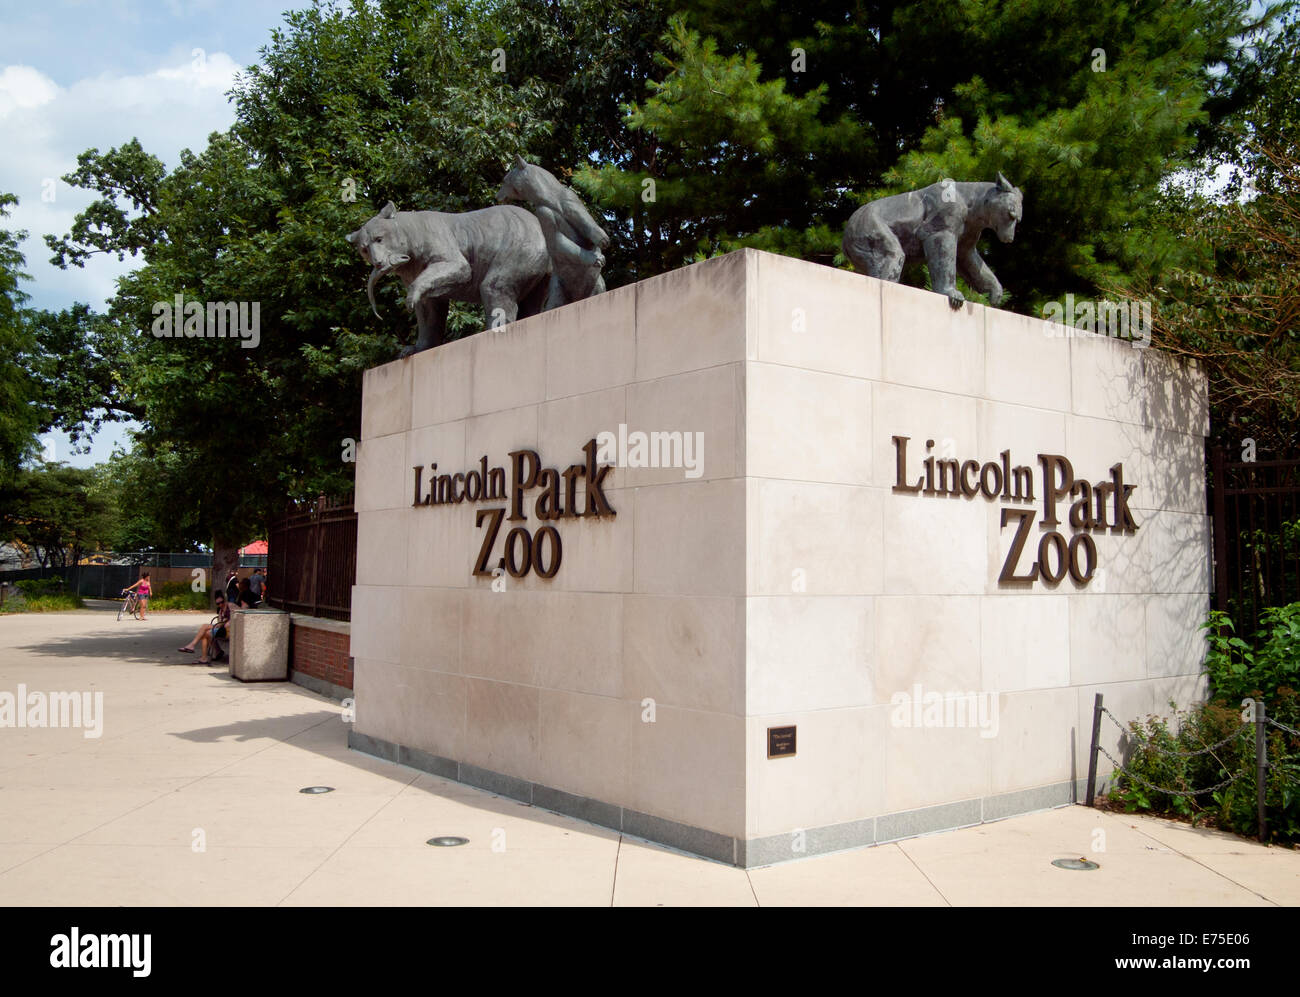 The front entrance of the Lincoln Park Zoo in Chicago, Illinois. Stock Photo